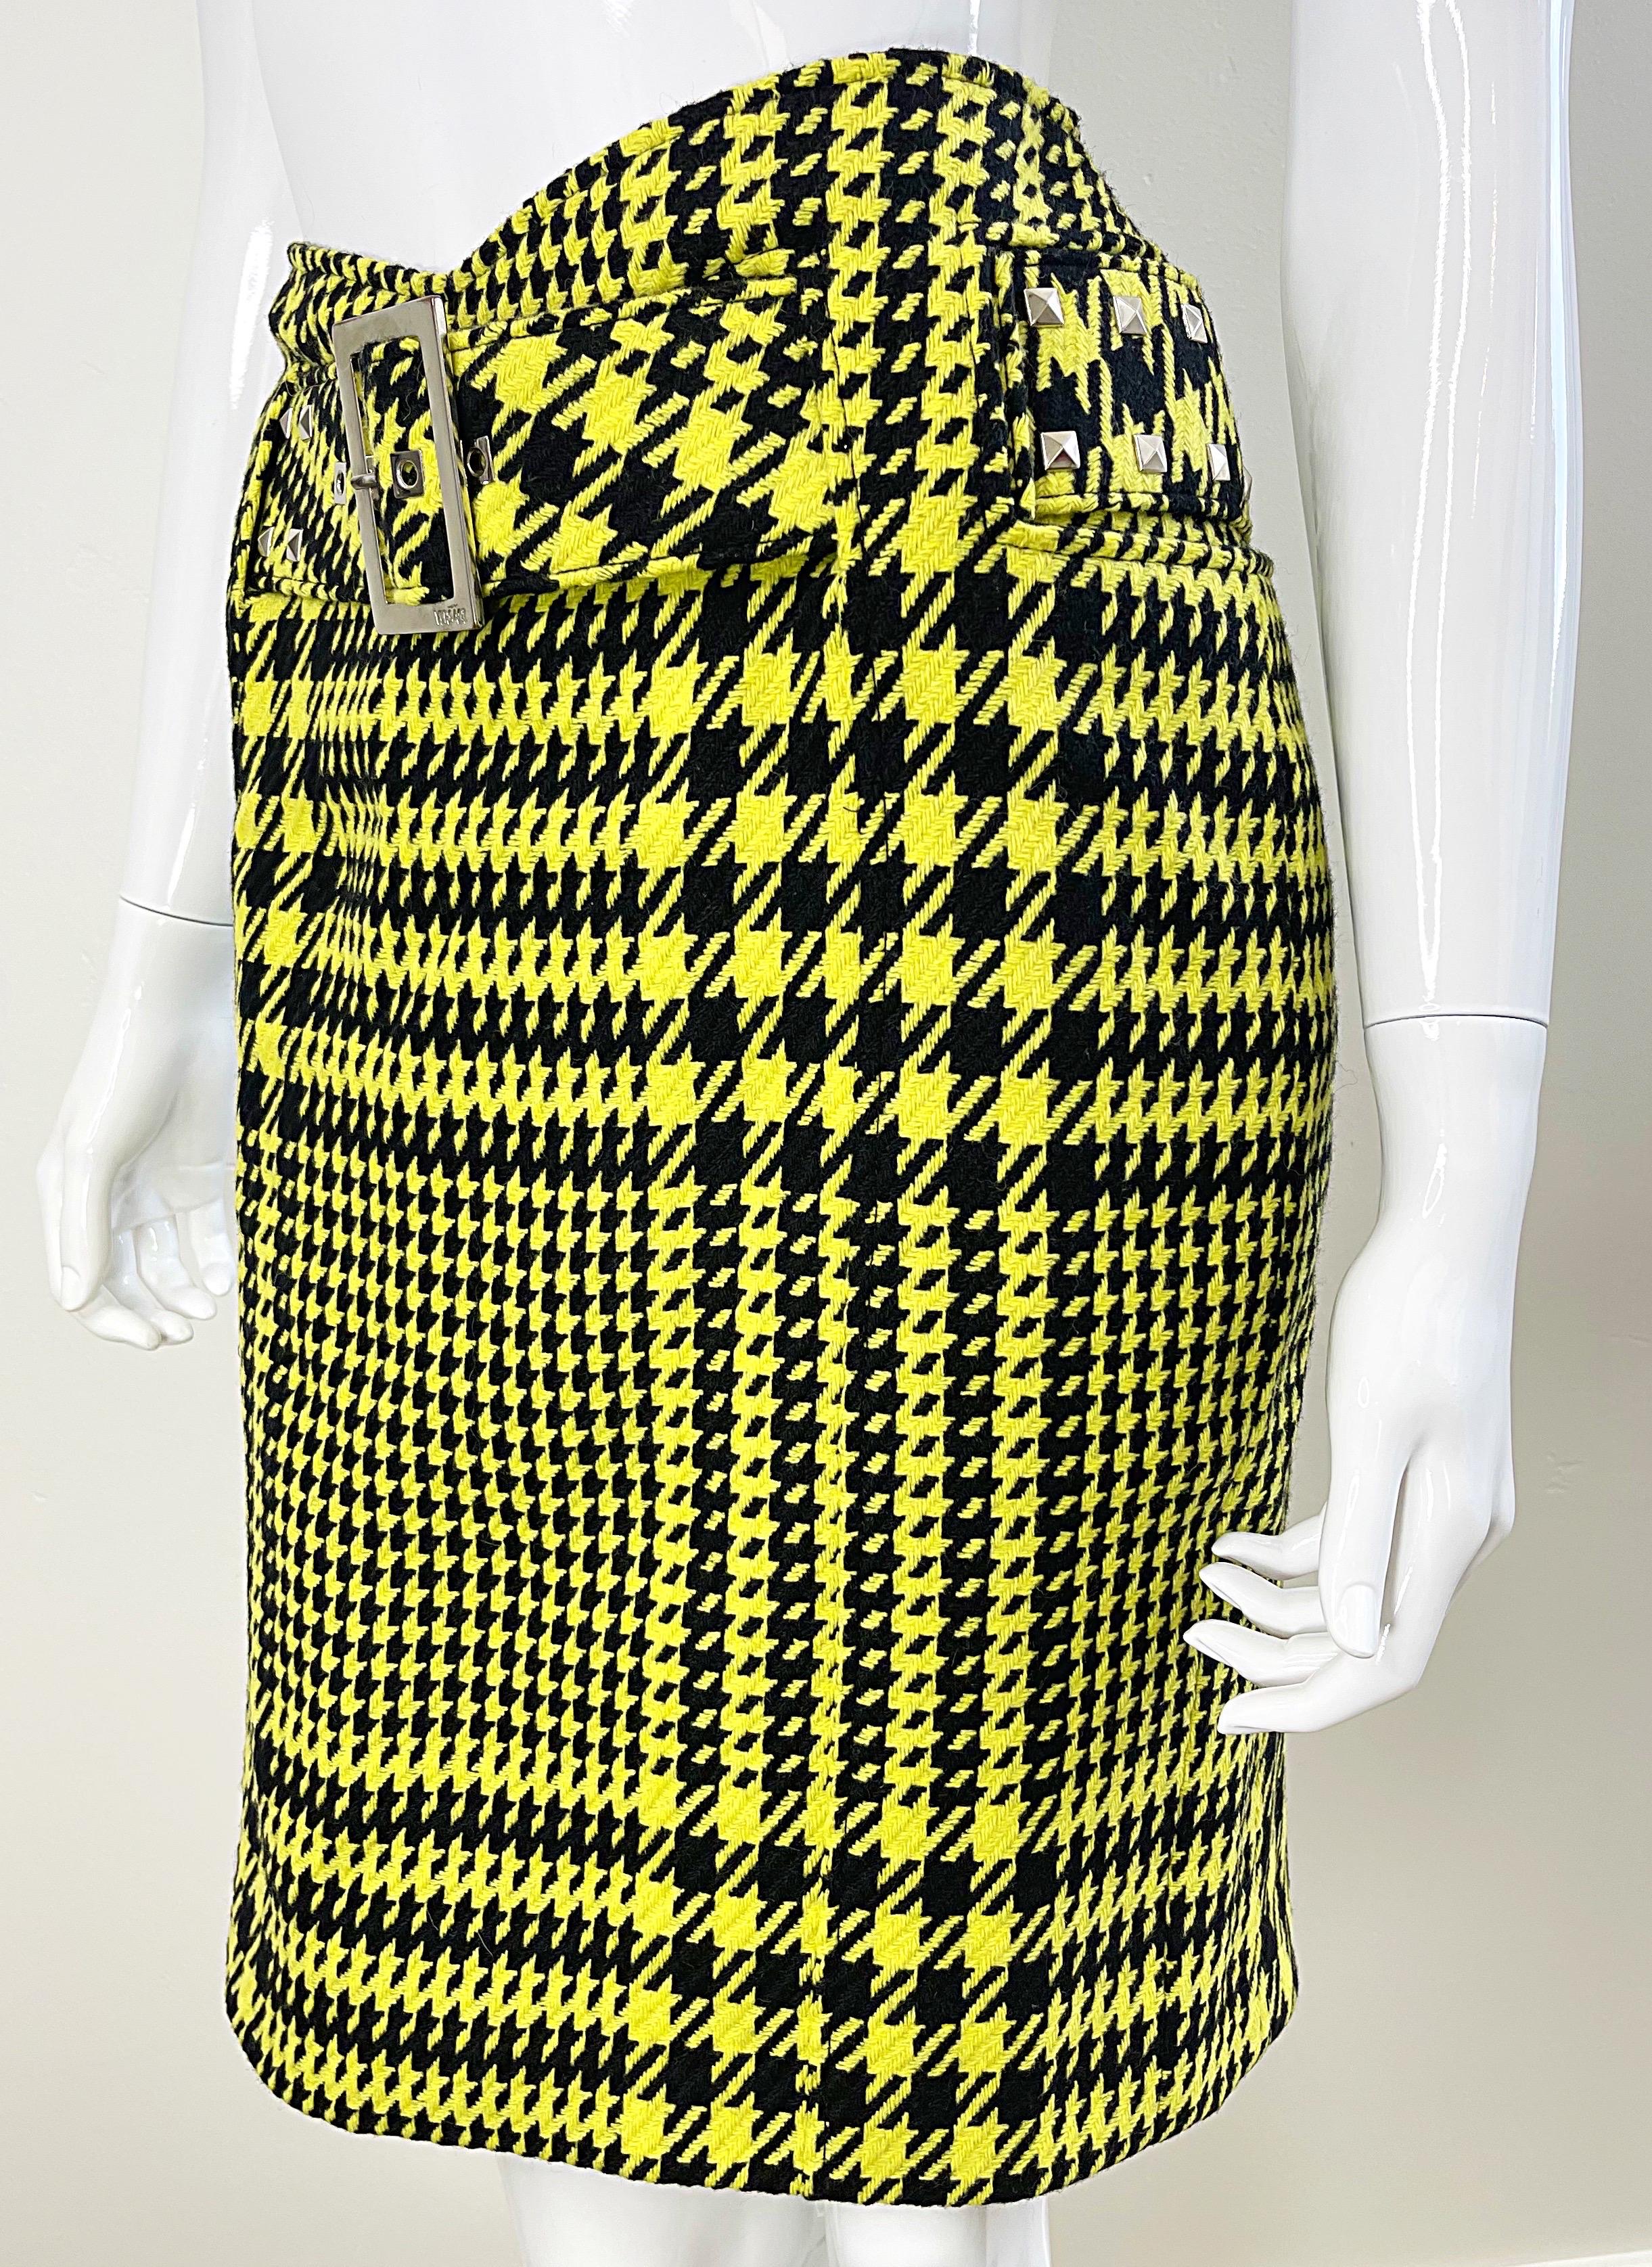 Gianni Versace Fall 2004 Runway Size 8 Yellow Black Houndstooth Belted Skirt For Sale 5